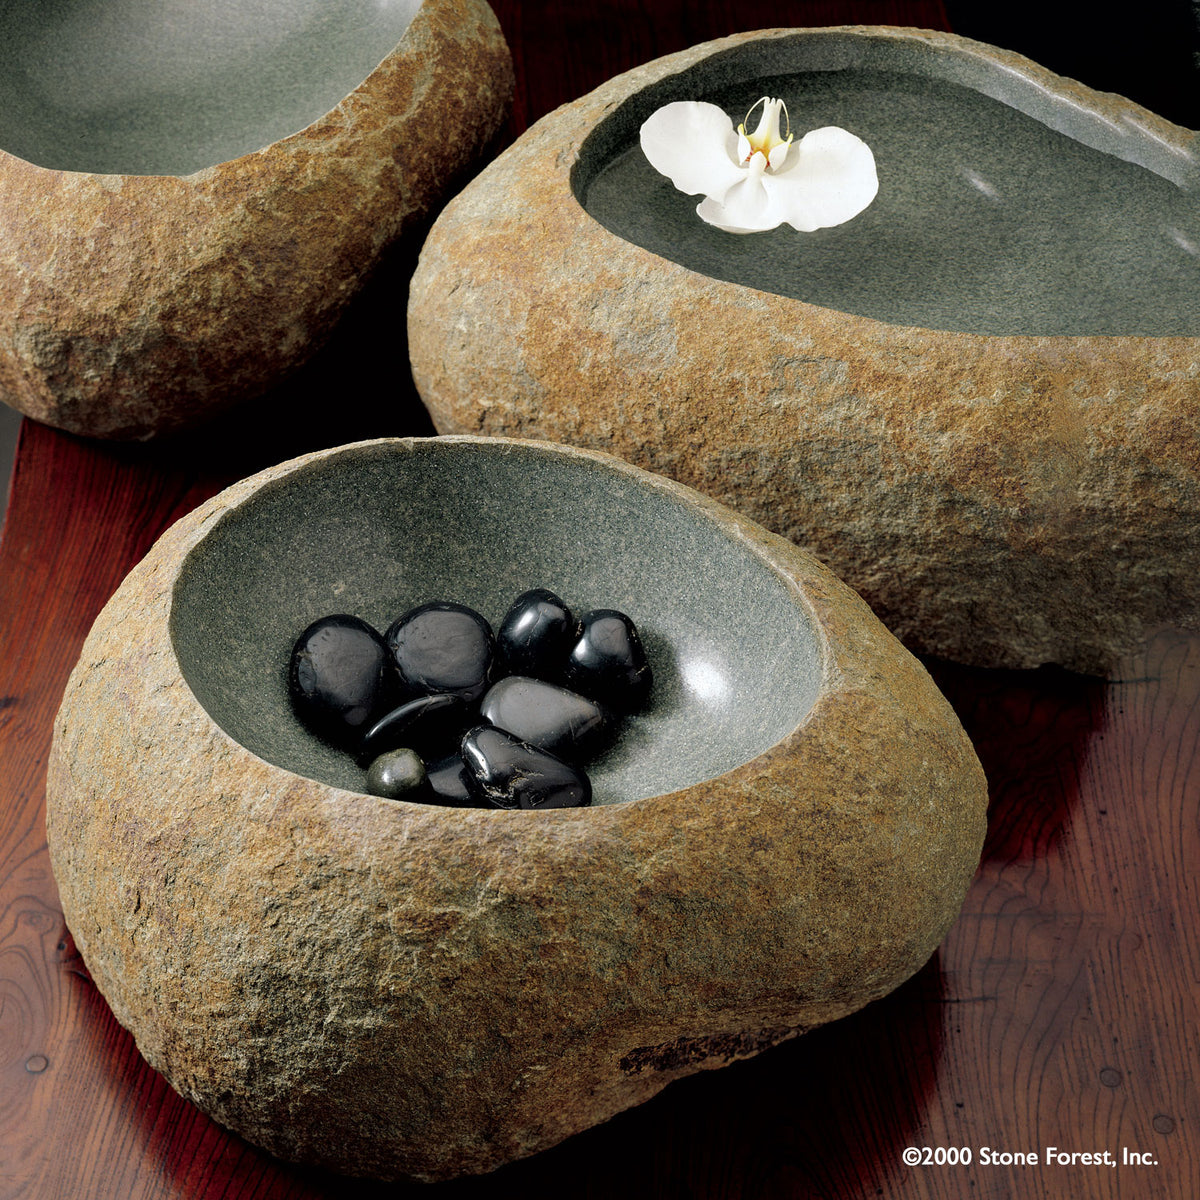 Stone Wabi Basin carved from gray granite boulders image 2 of 2